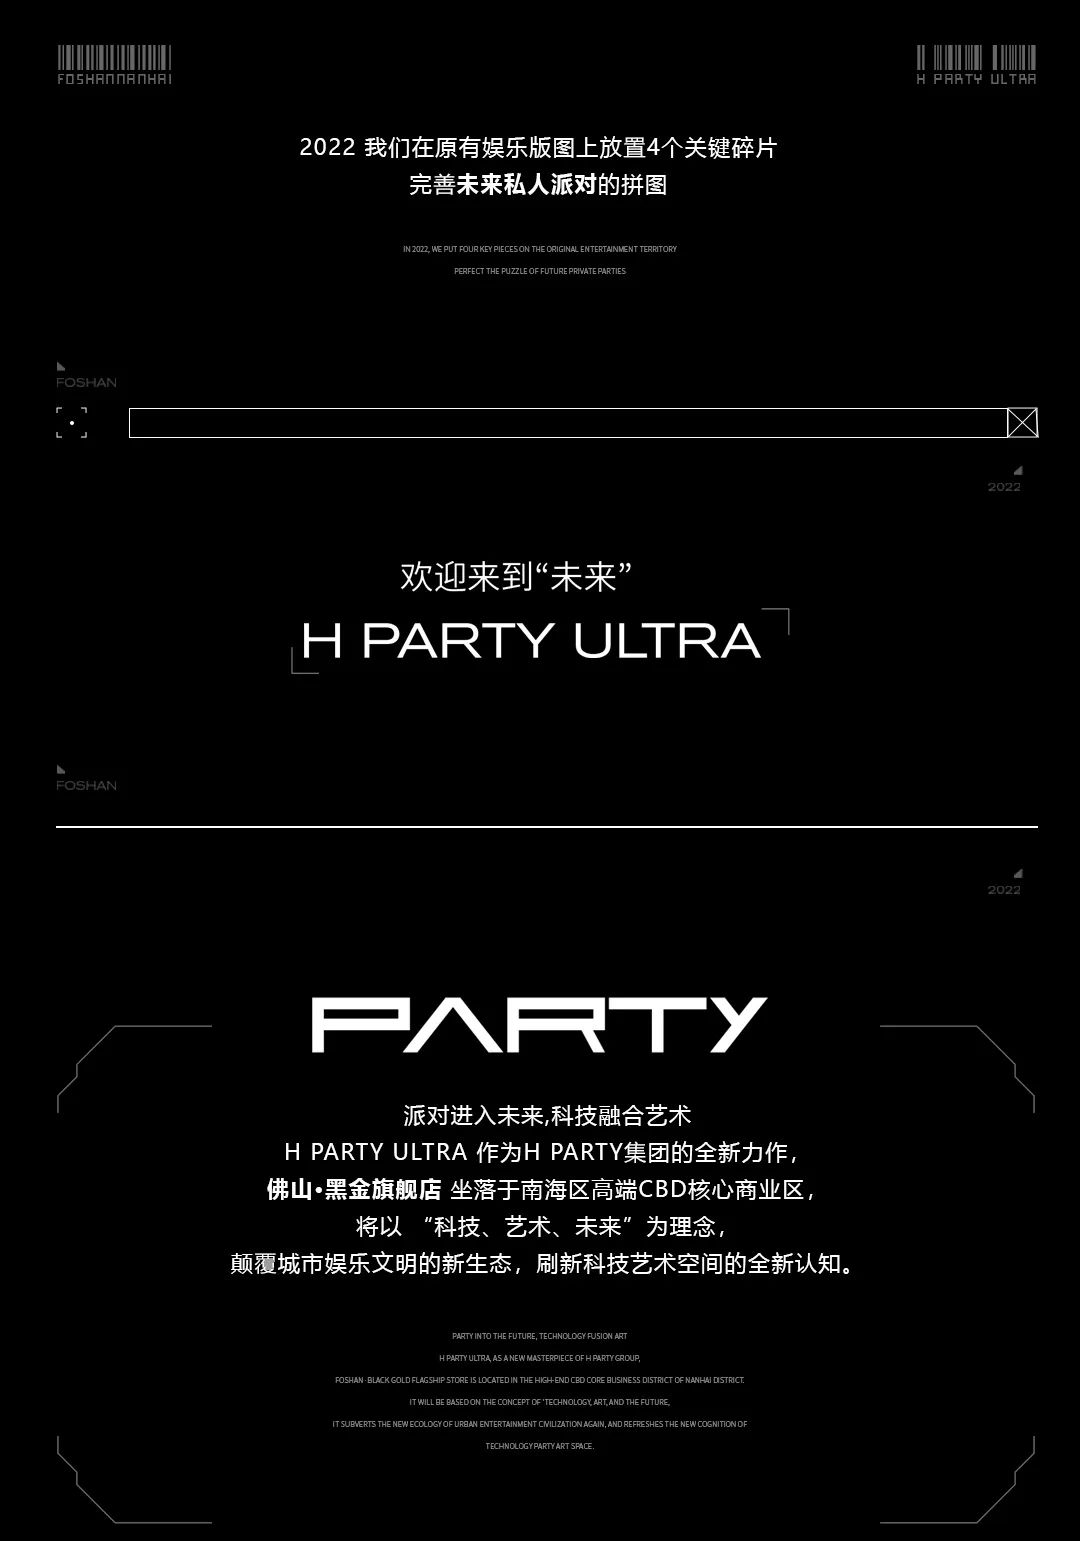 H PARTY ULTRA | PARTY INTO THE FUTURE-佛山H PARTY